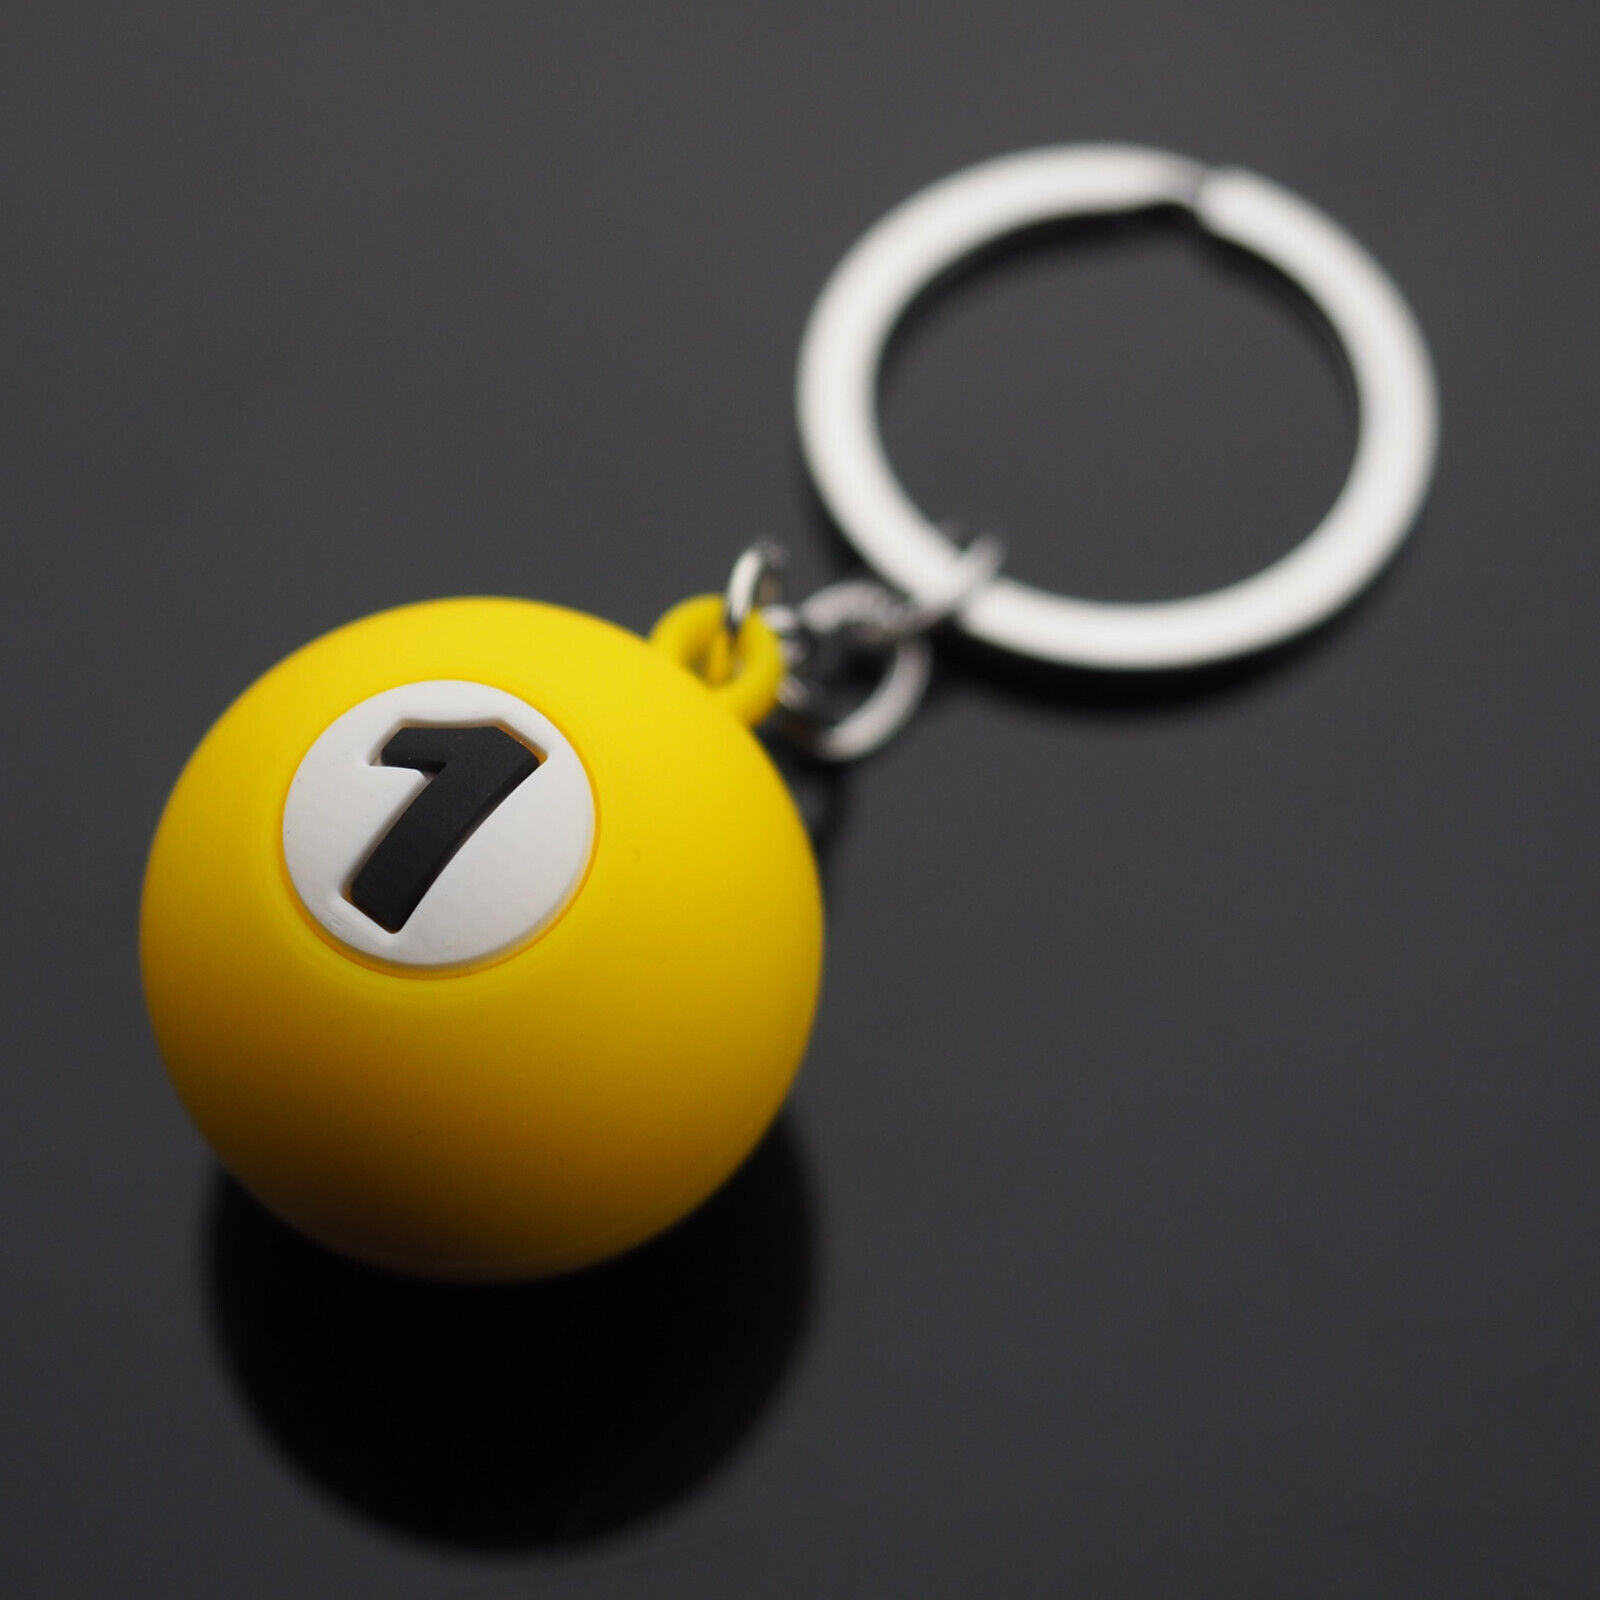 1x Billiards Table Silicone Pool Ball Keychain Player Gift  - Choose #'s 1 - 9